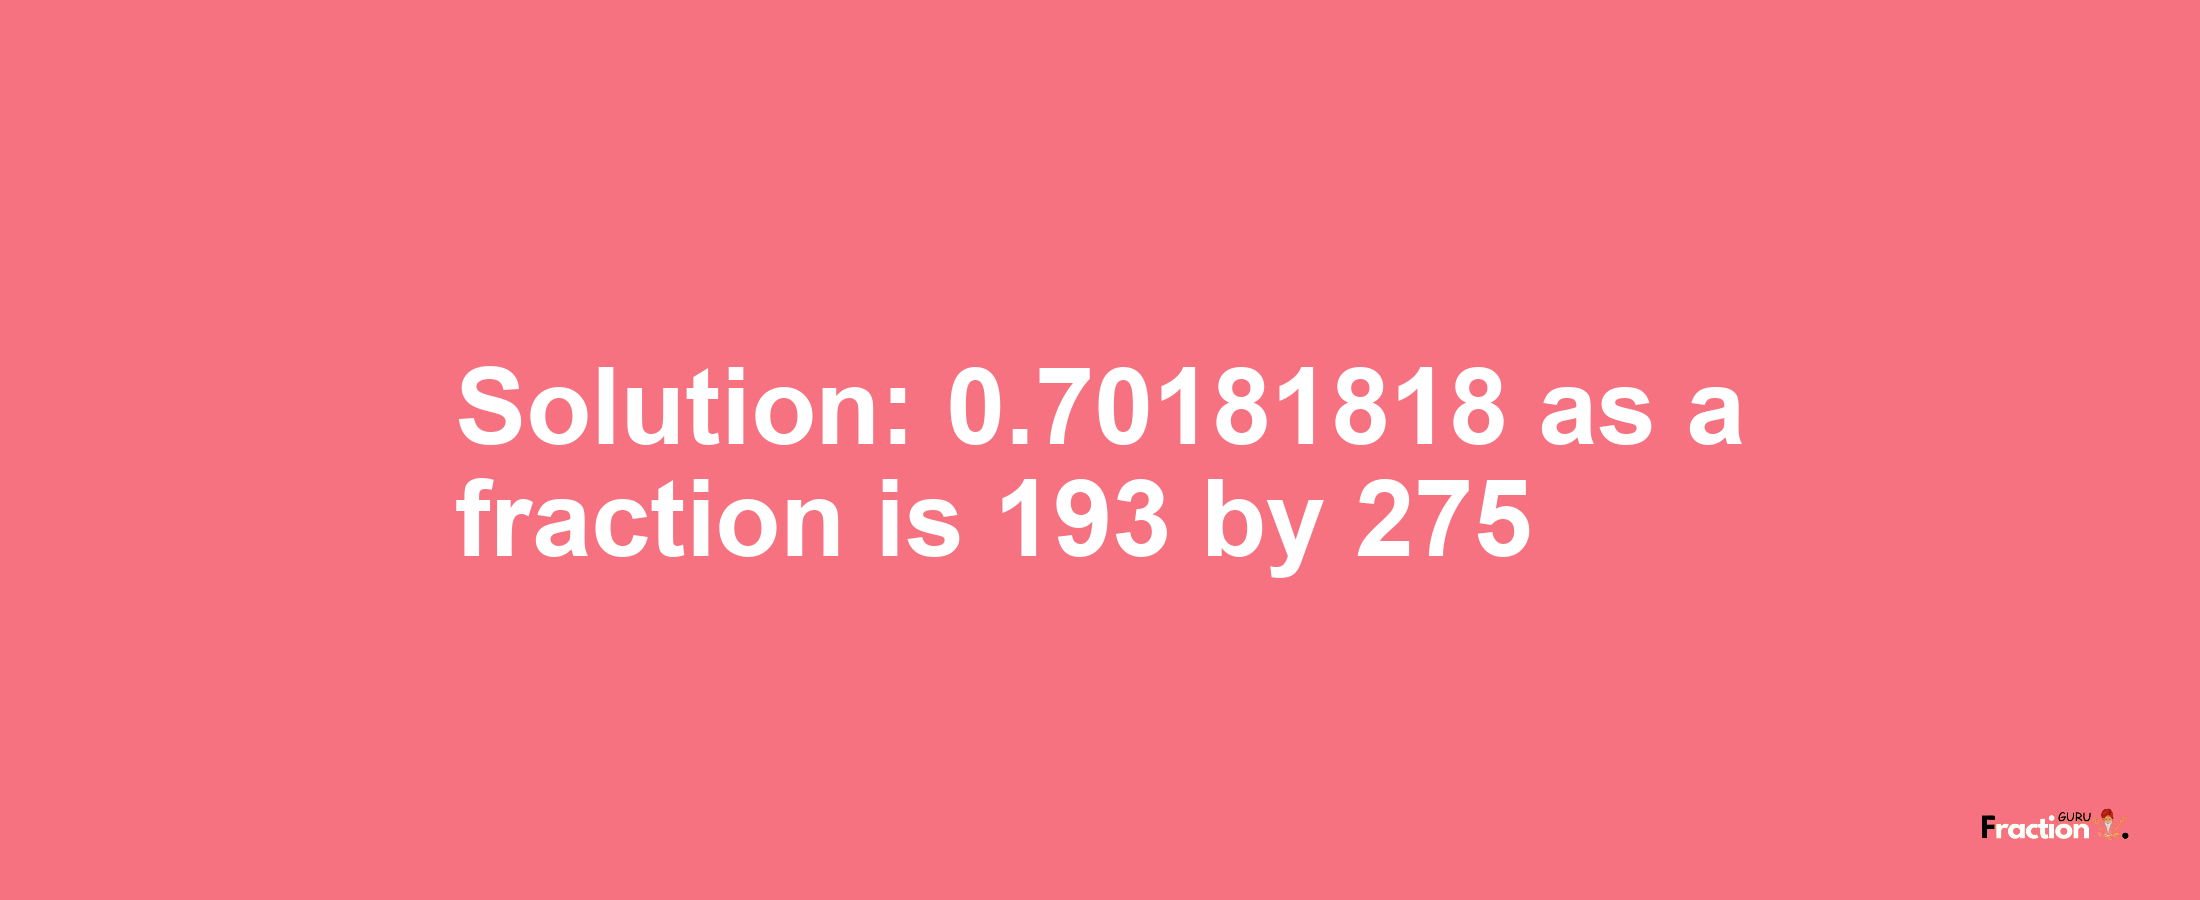 Solution:0.70181818 as a fraction is 193/275